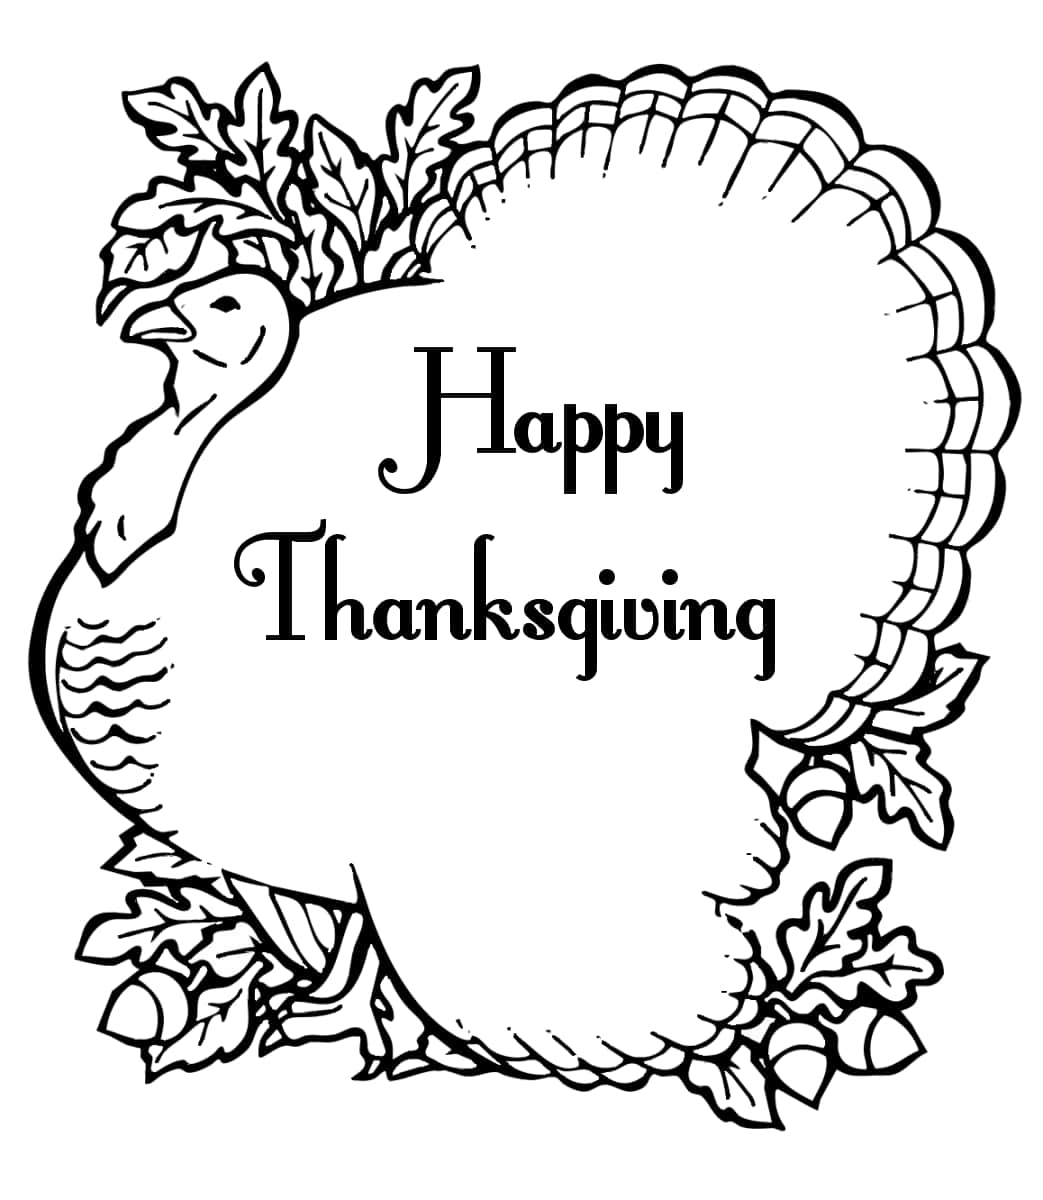 Celebrate this special event with this Thanksgiving Coloring Picture